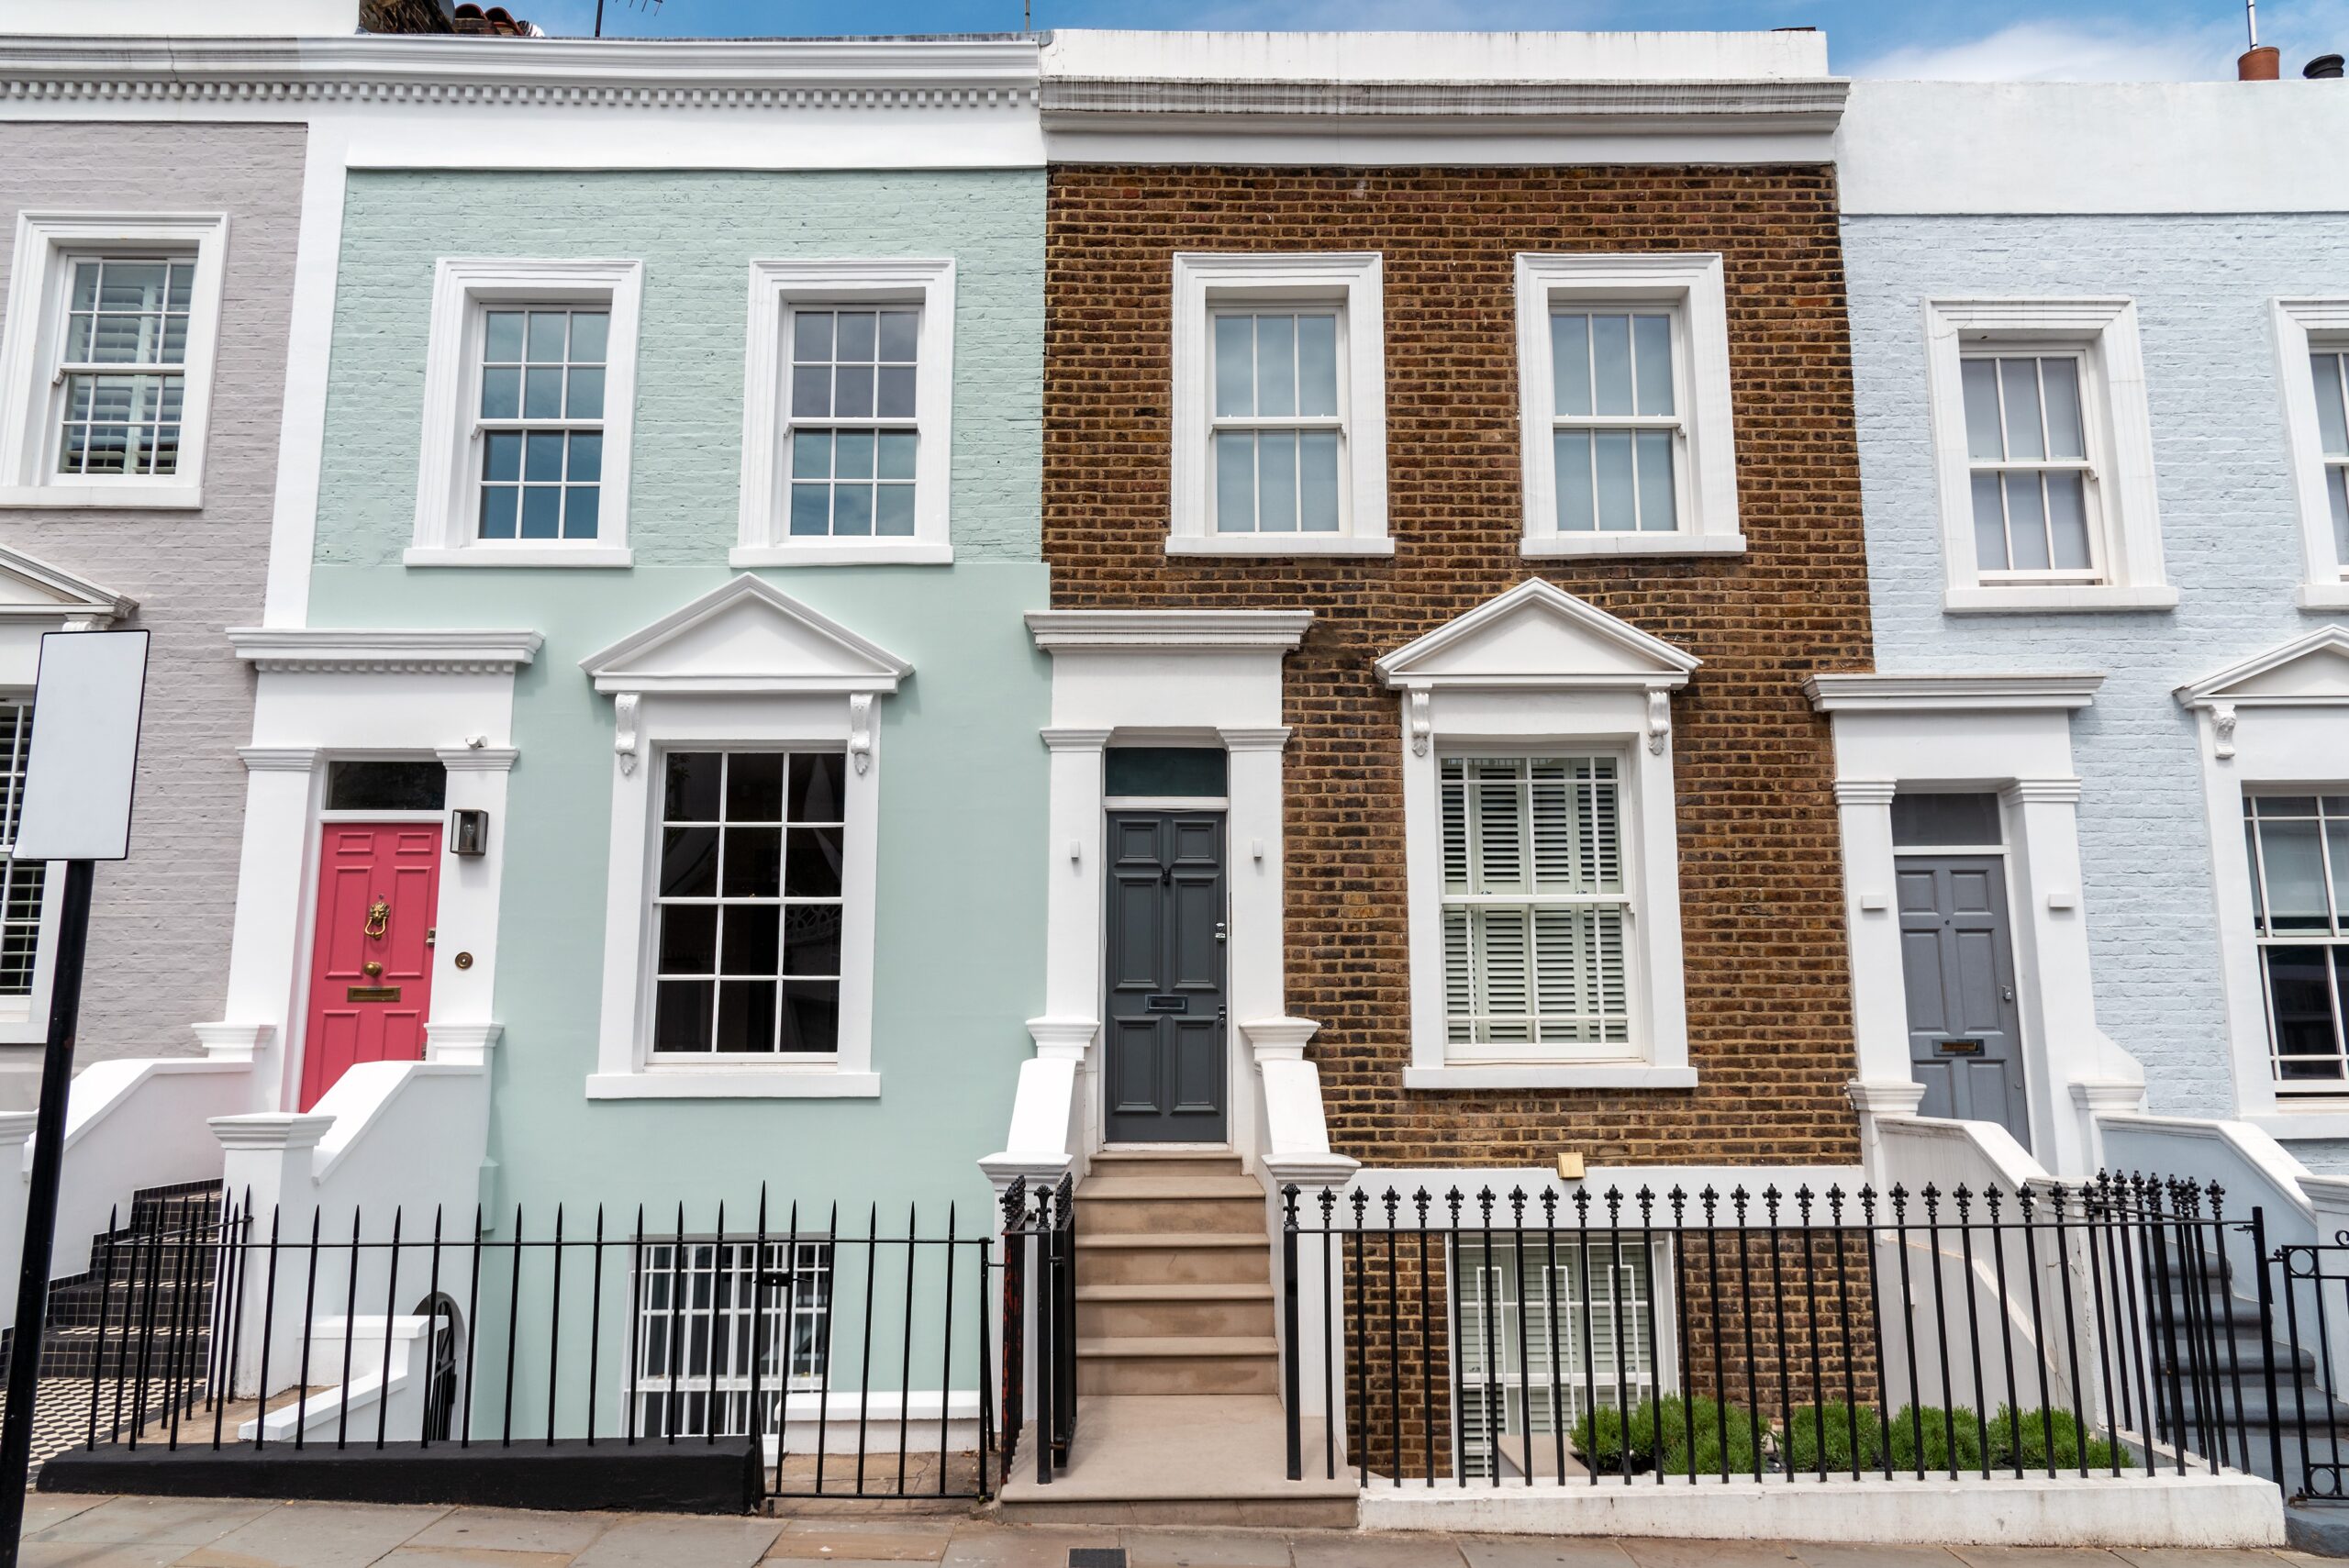 Bridging the divide between landlords and tenants - https://roomslocal.co.uk/blog/bridging-the-divide-between-landlords-and-tenants #divide #between #landlords #tenants #divide